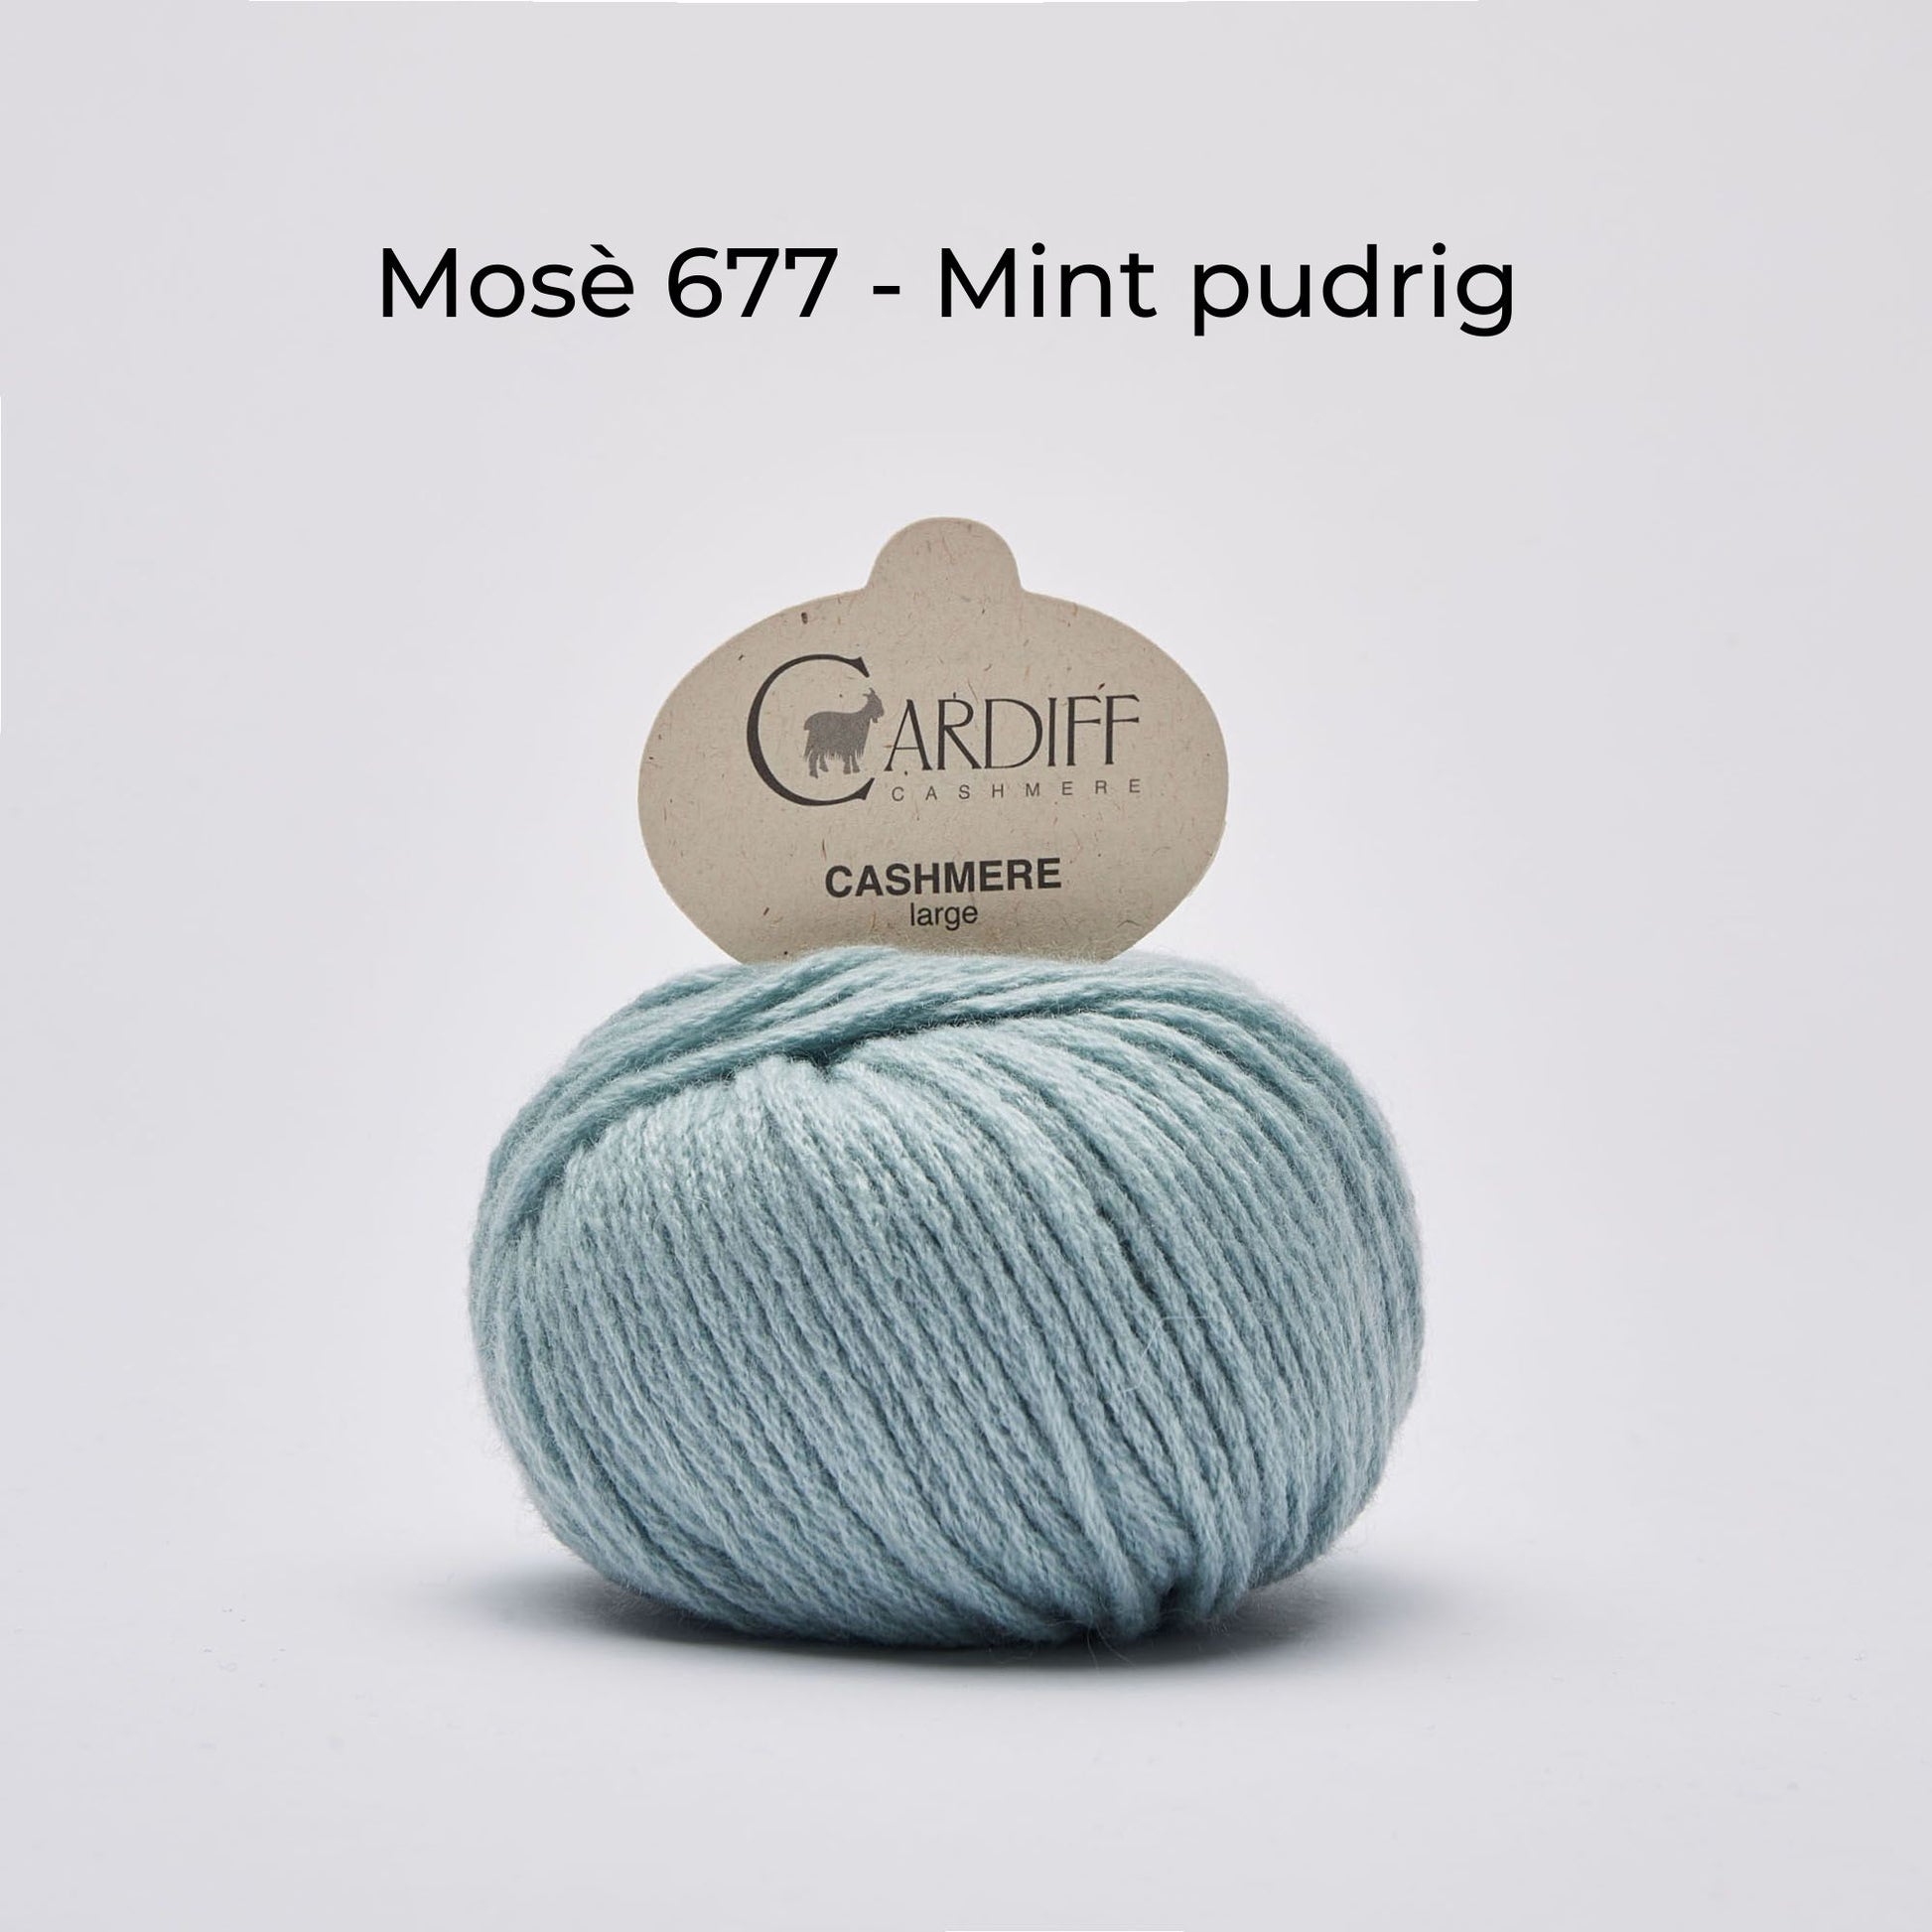 Wollknäuel, Cardiff Cashmere Classic, Farbe Mosè 677, pudriges Mint